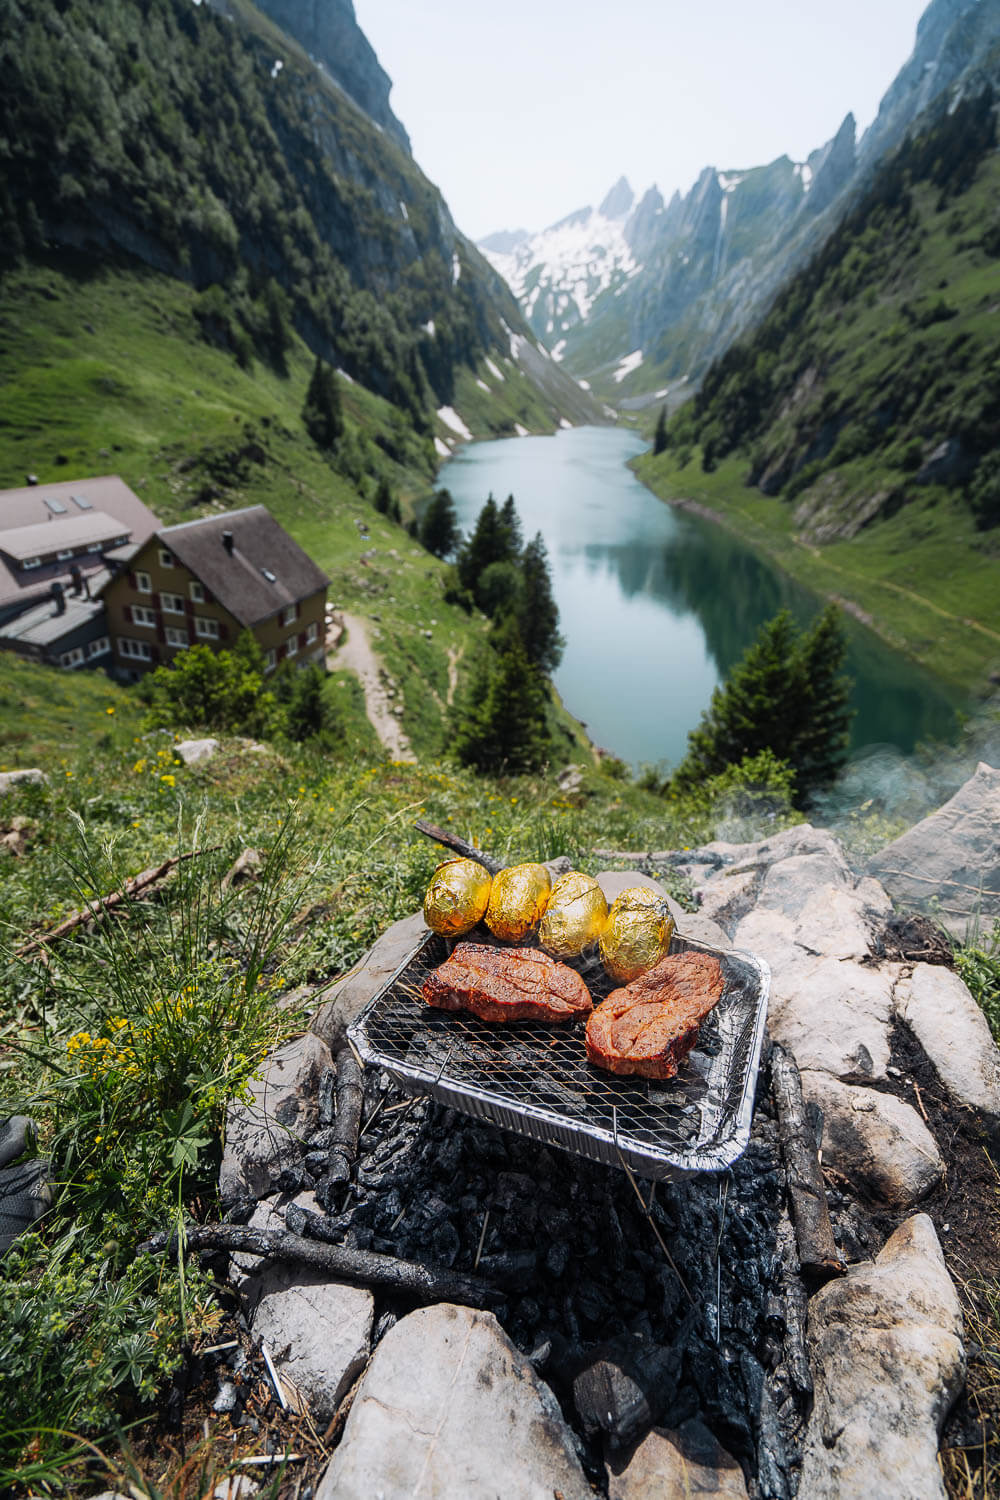 Barbecue Grill at the Fälensee Lake